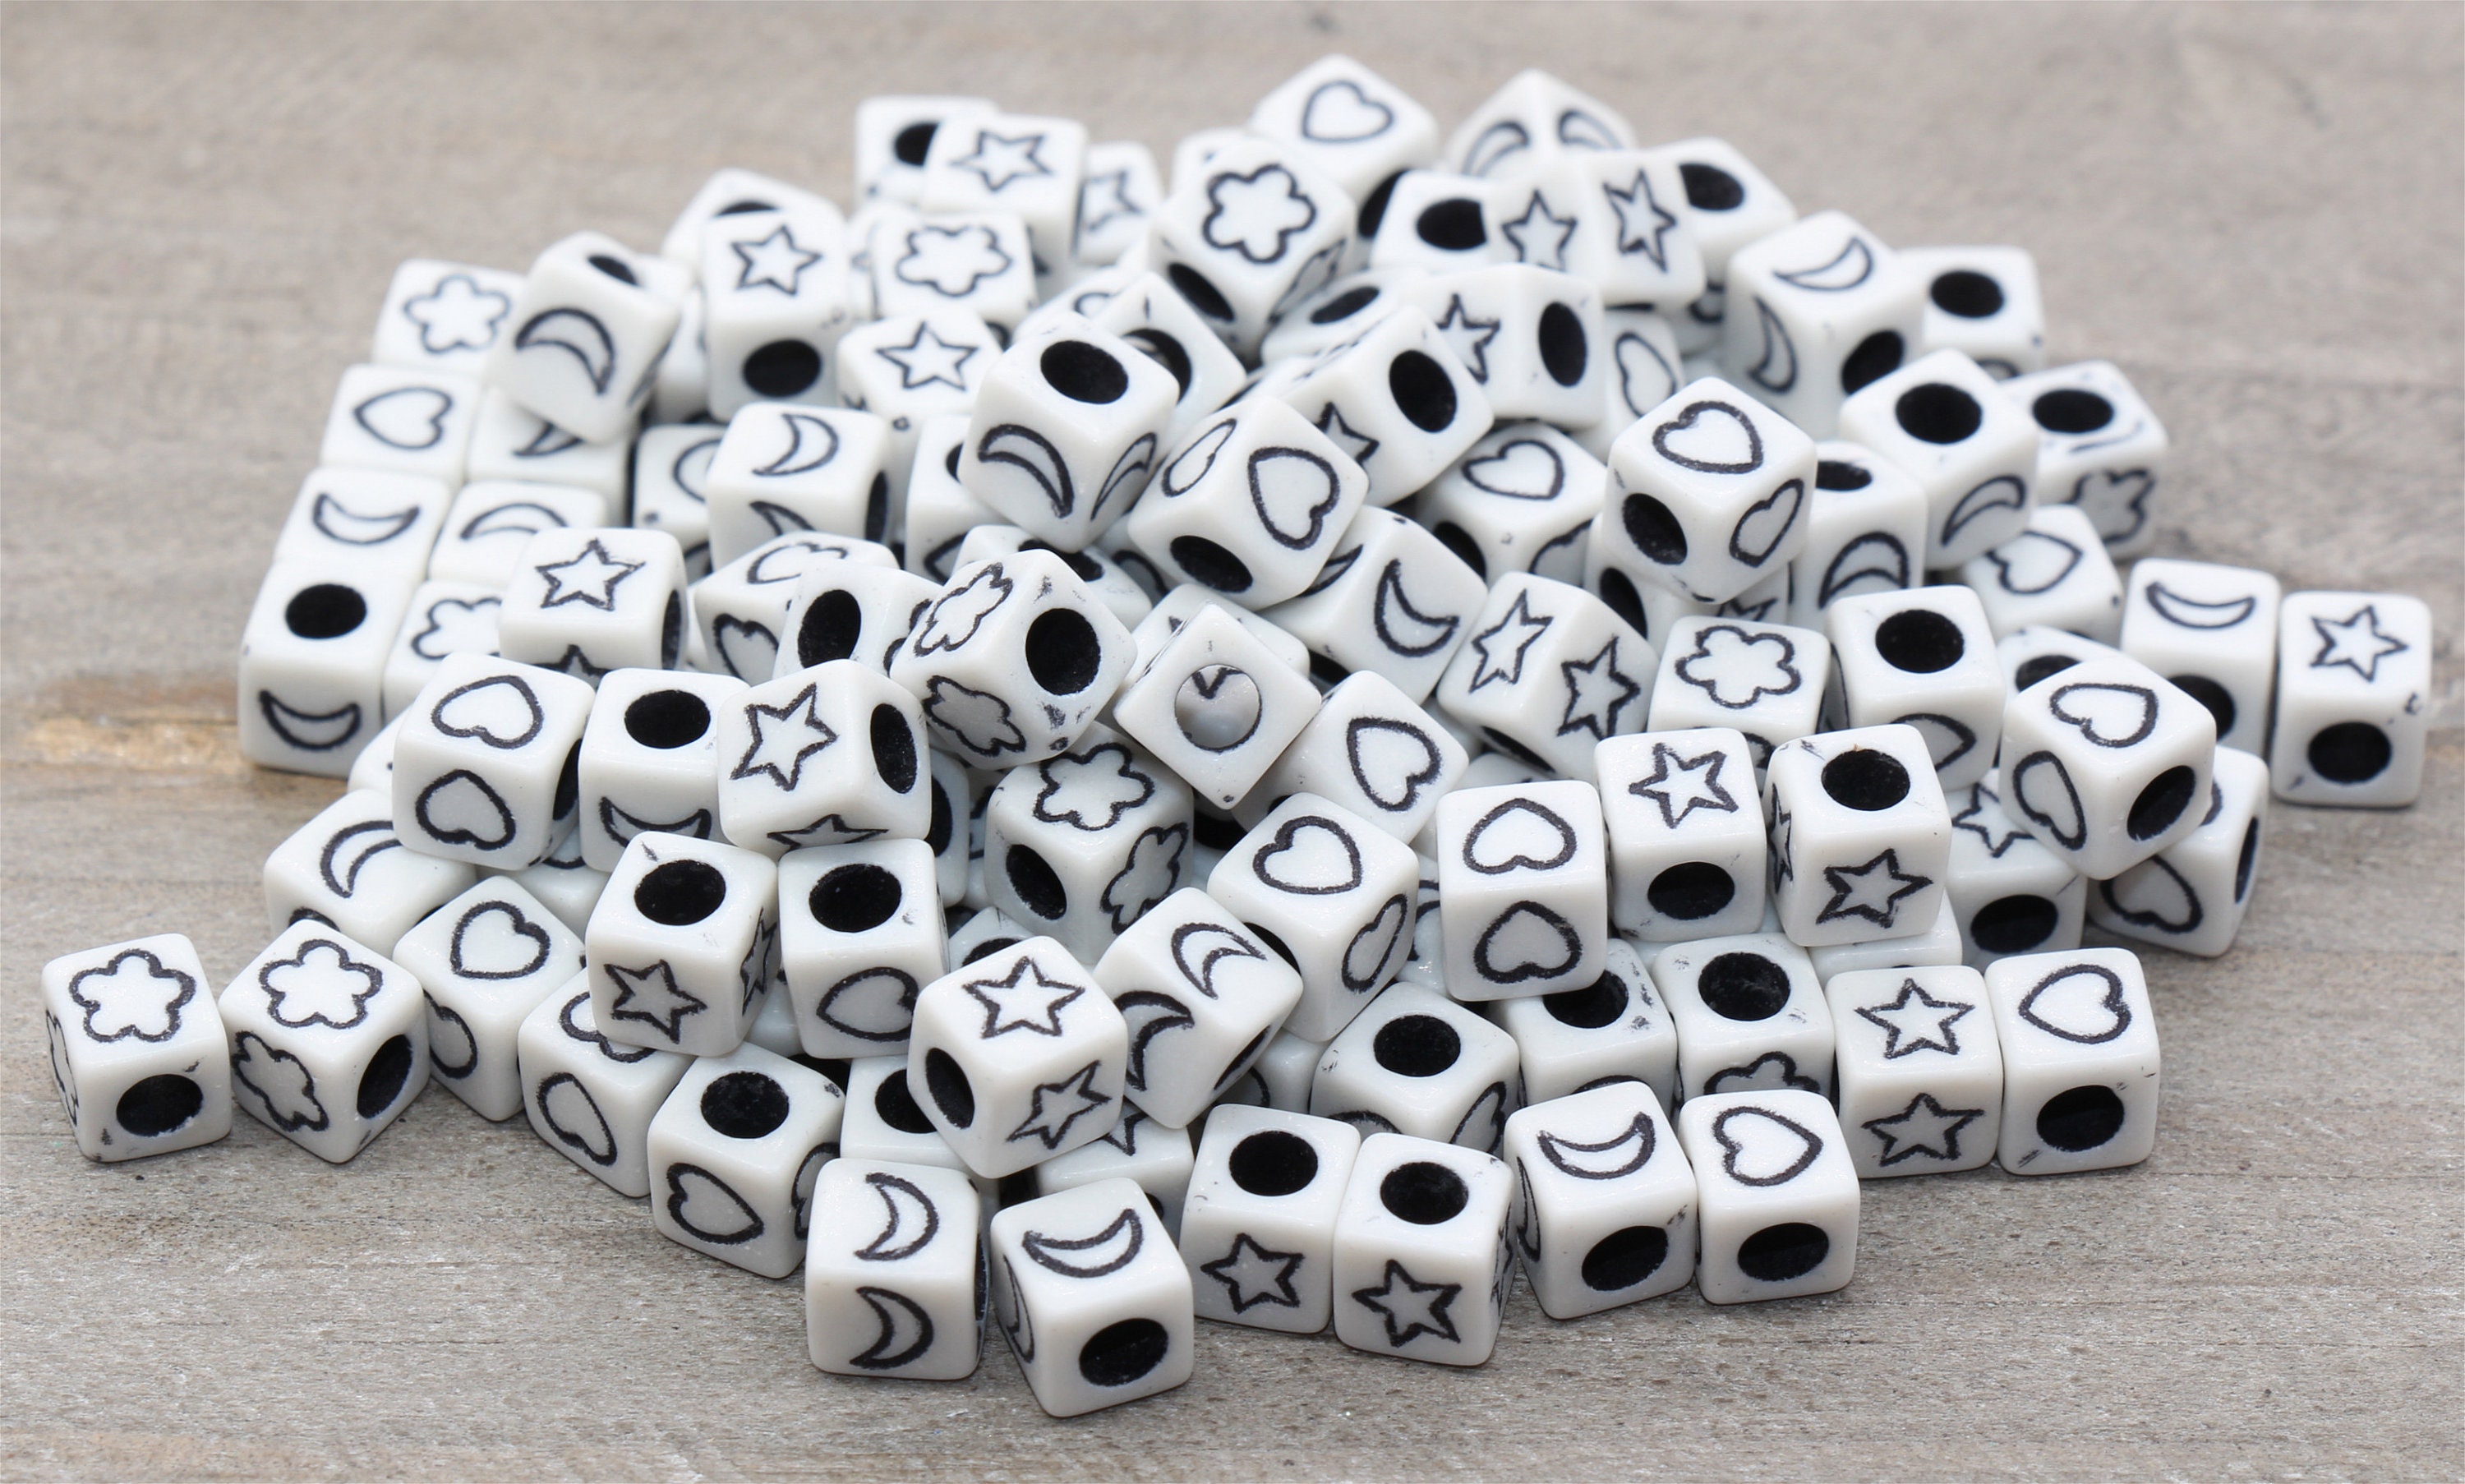 6x6mm Decoration Beads White Acrylic Cube Square Mixed Russian